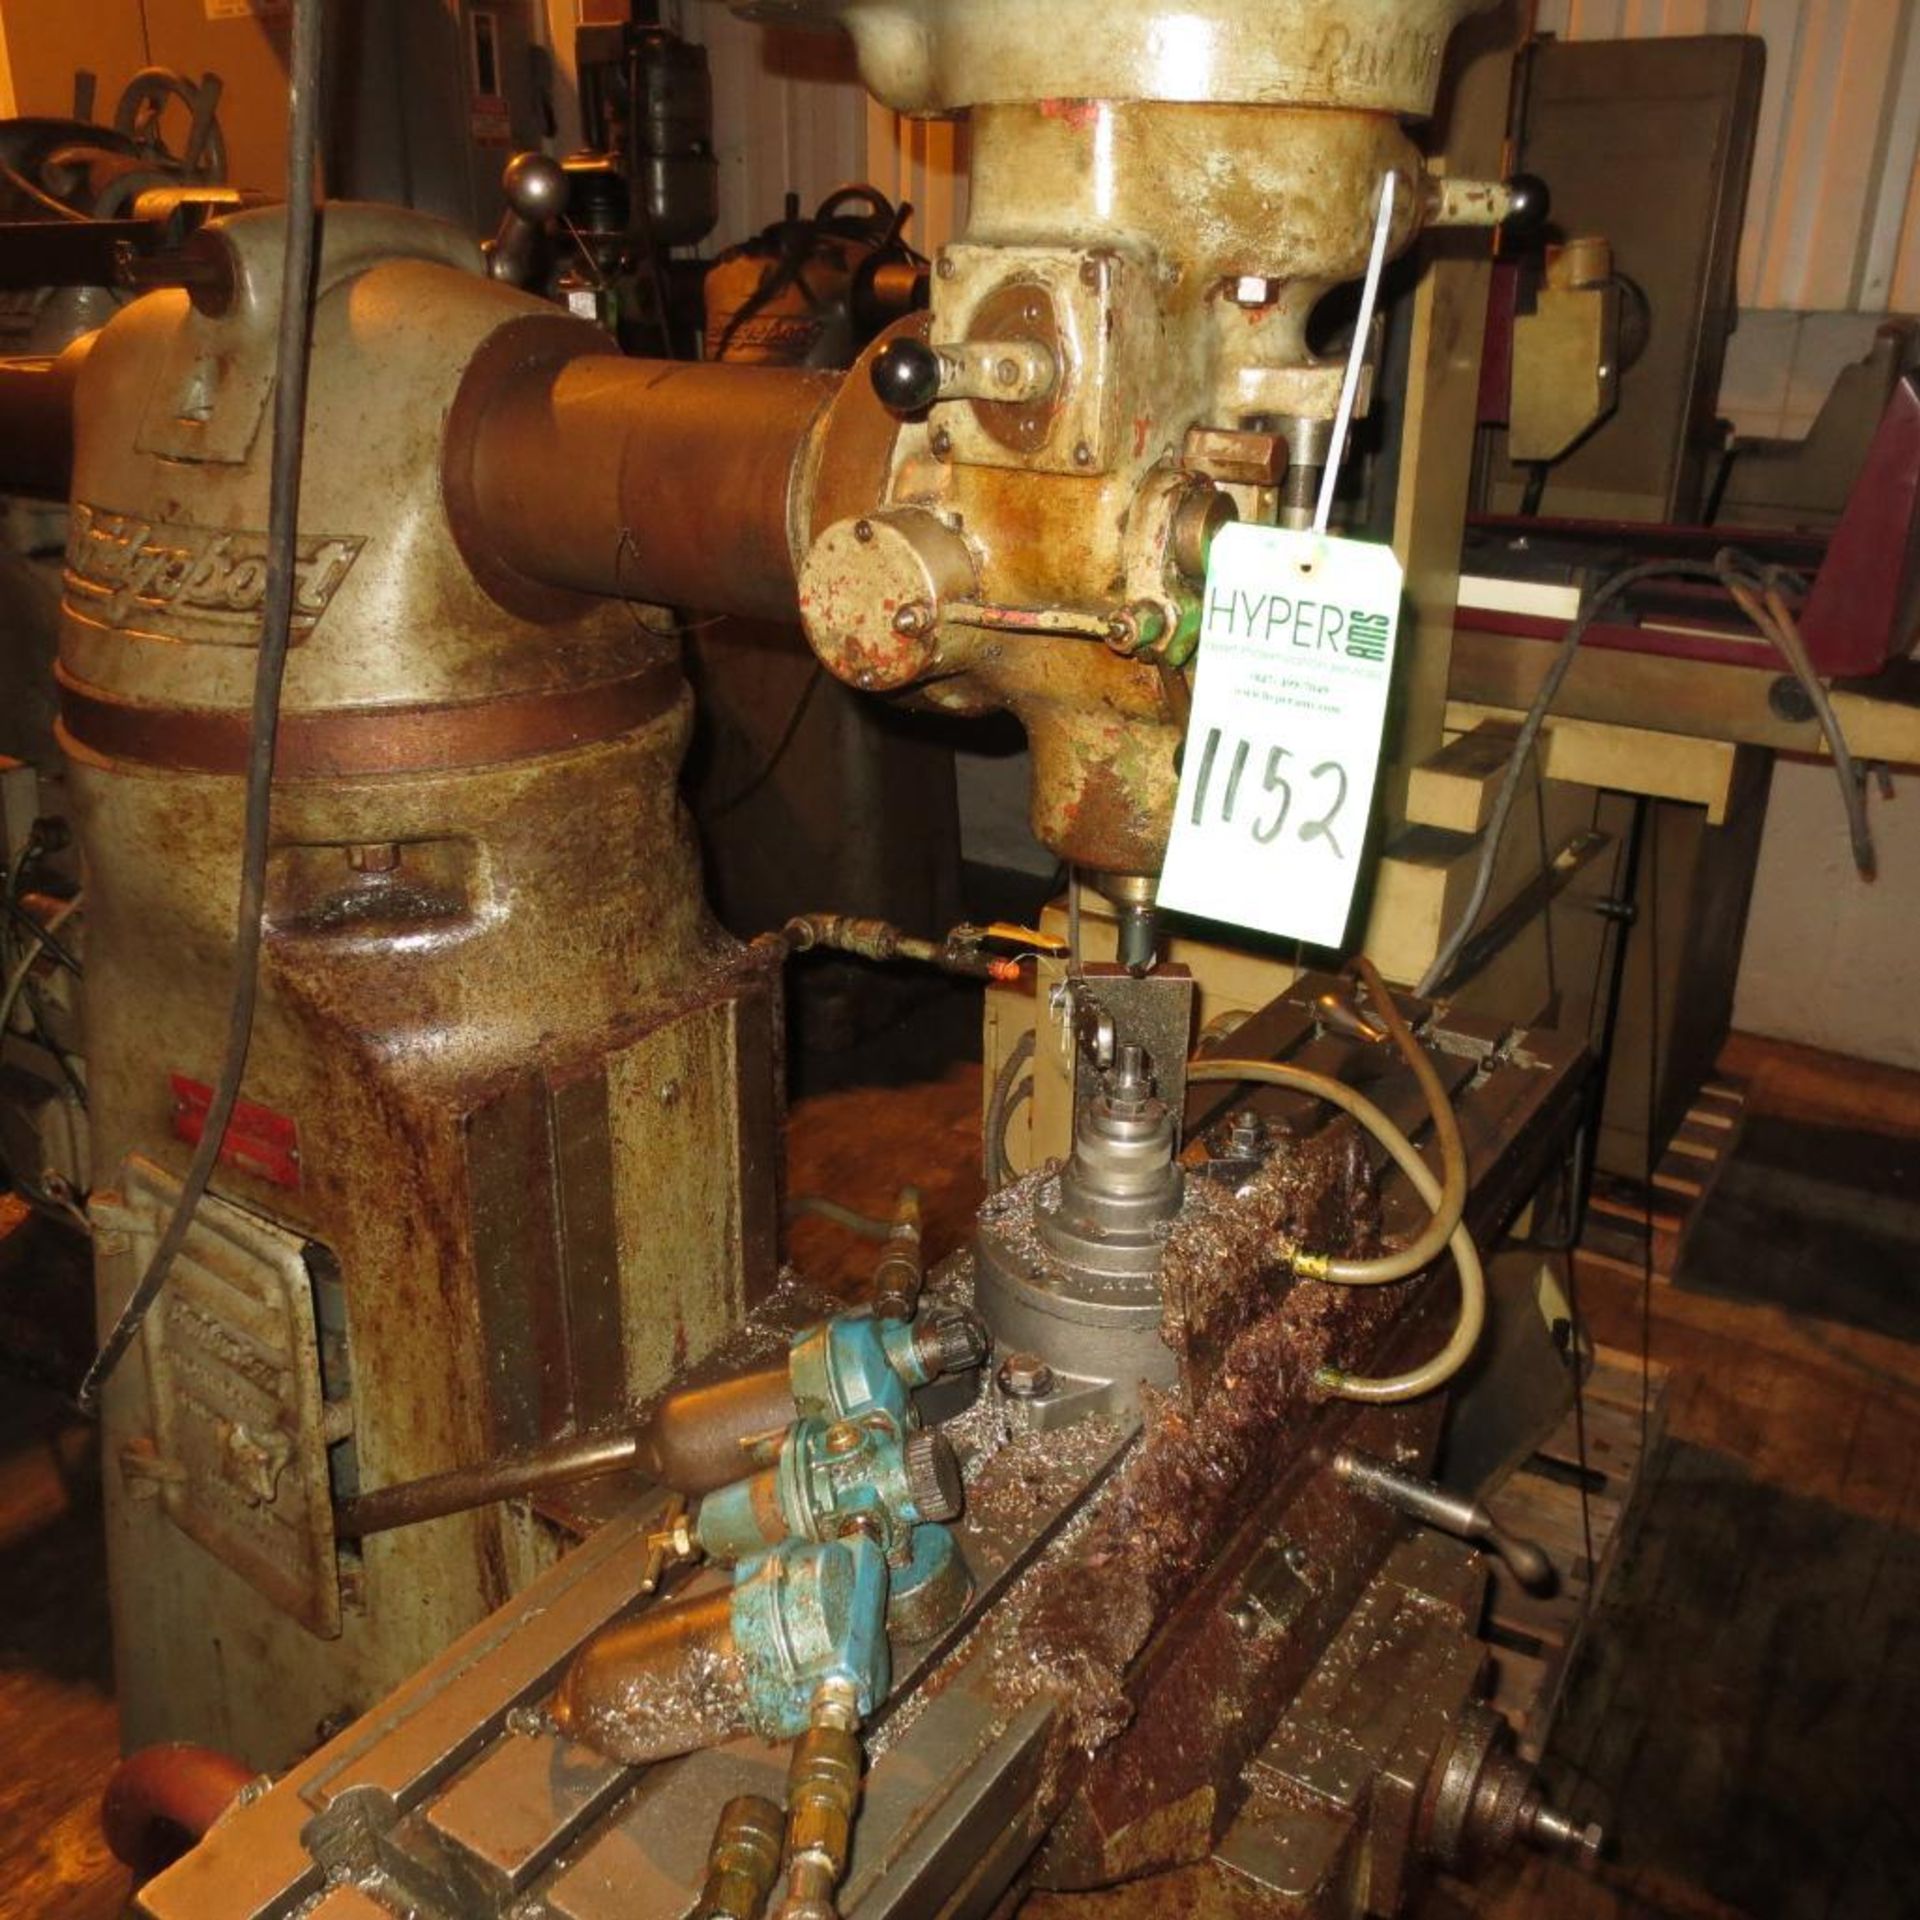 Bridgeport Vertical Milling Machine, 49"x9" Slotted Table, S/N 19604 *RIGGING $65* - Image 3 of 5